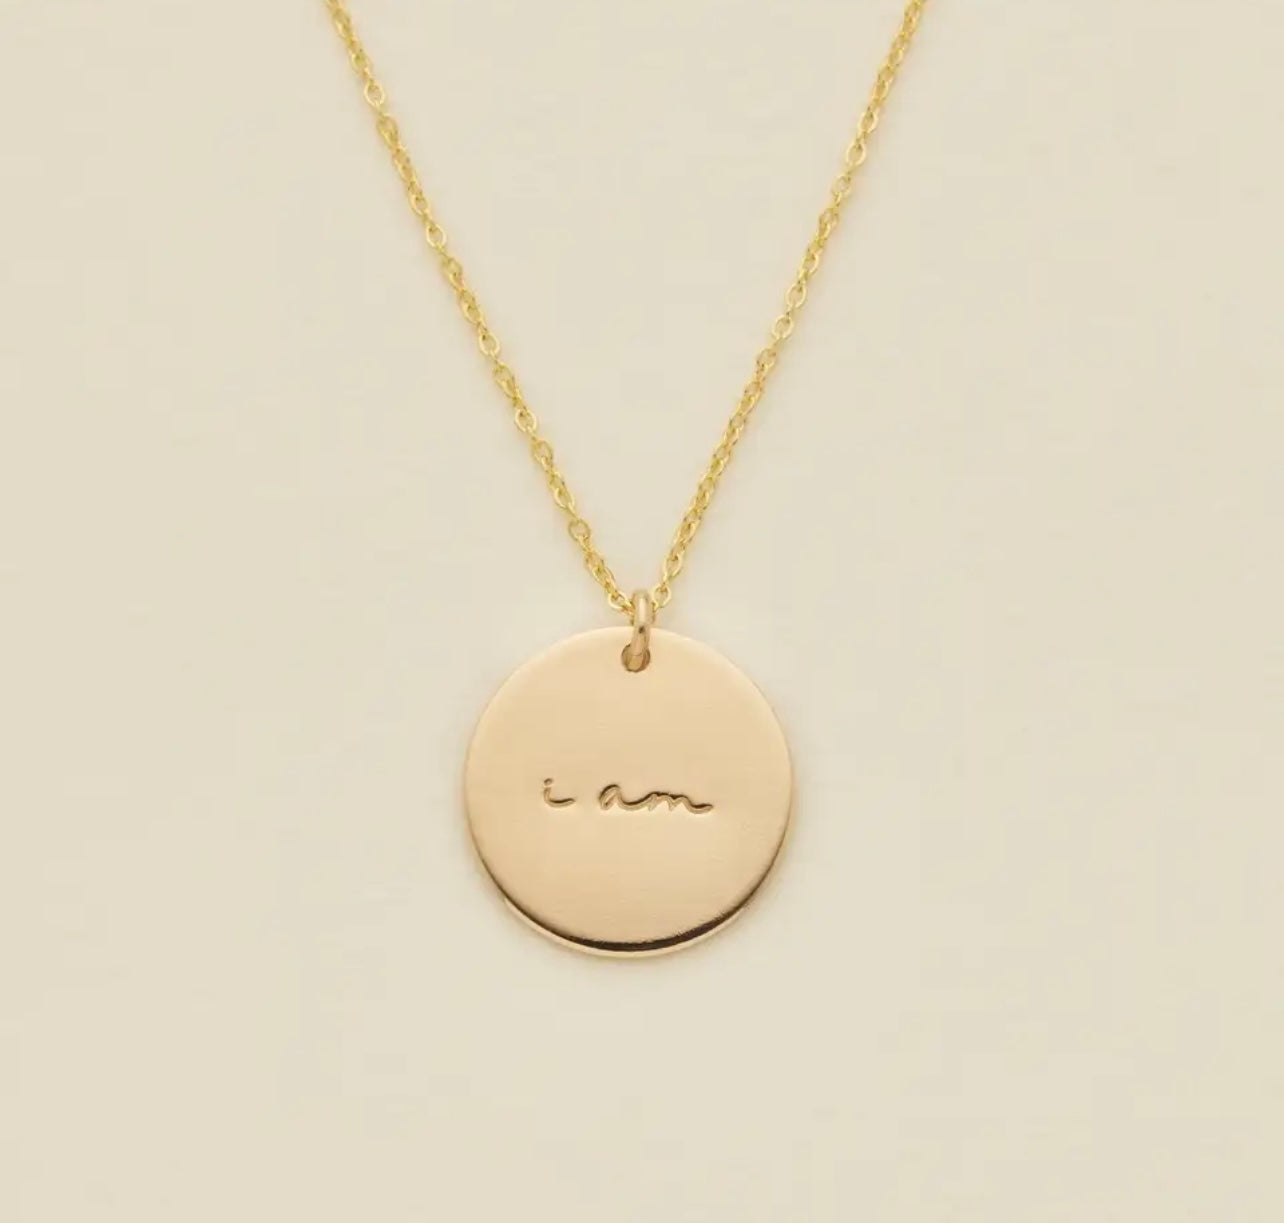 Beautiful Gold or Silver “I Am” Necklace